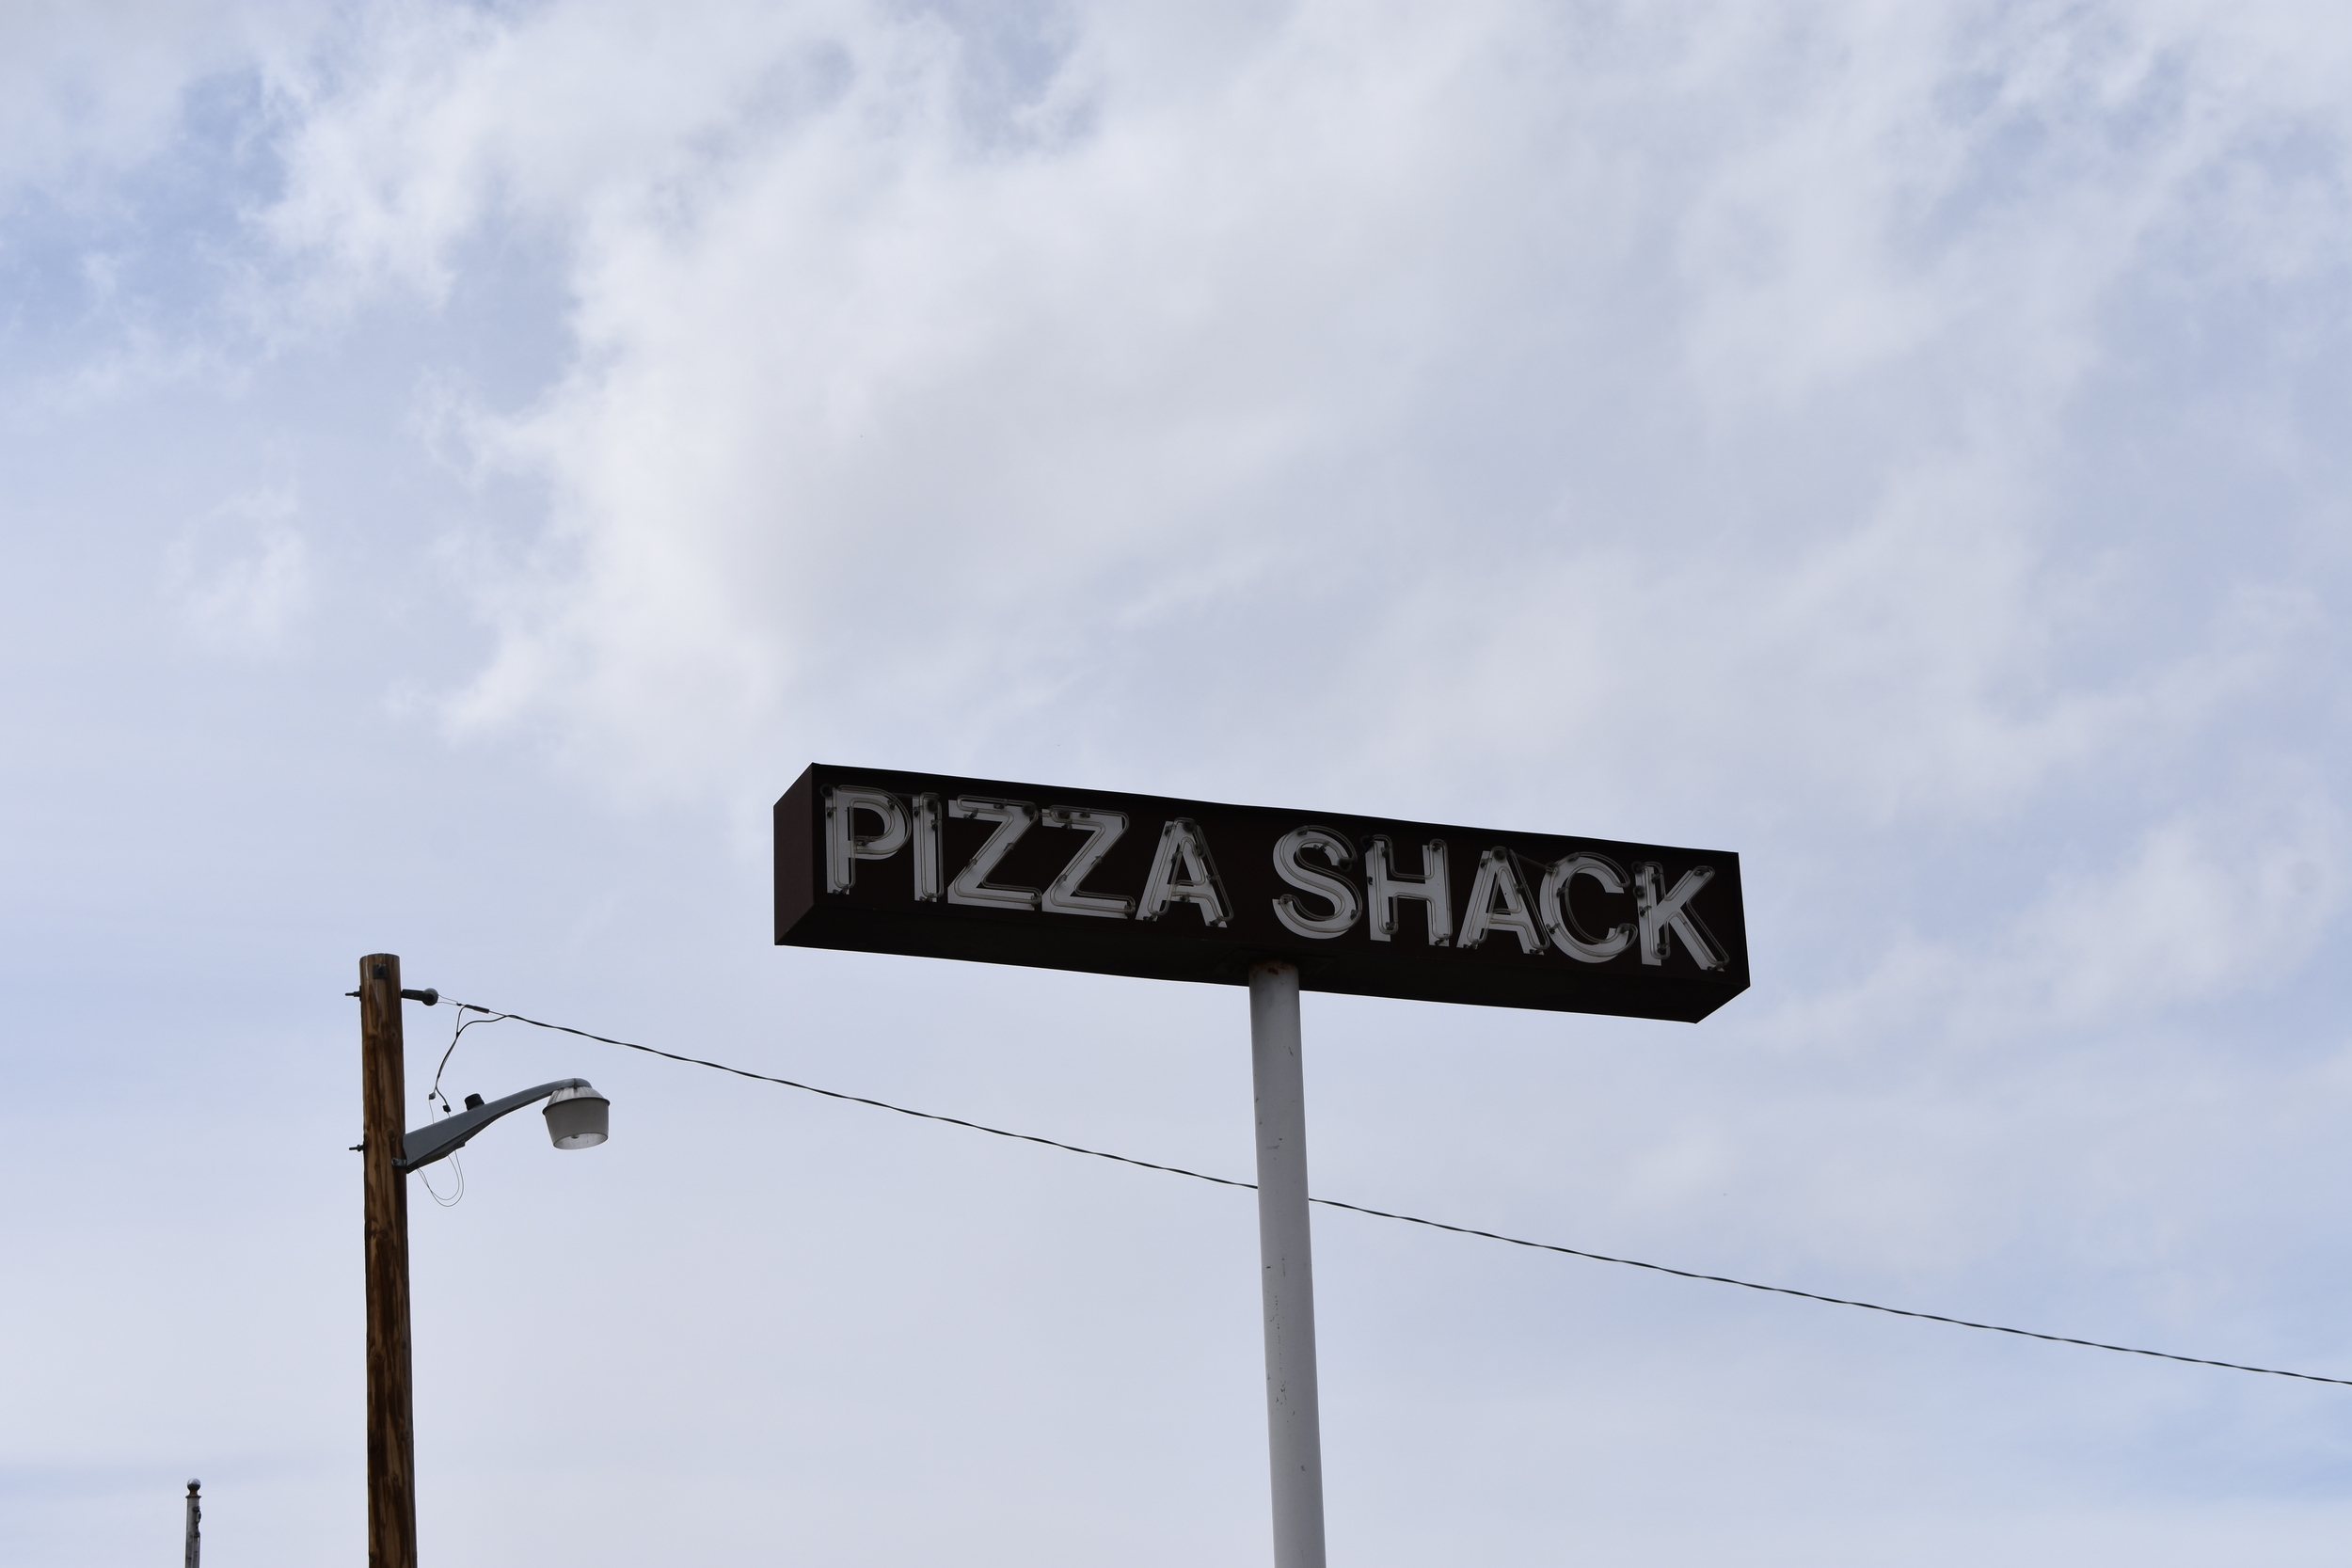 Pizza Shack mounted sign, Fernley, Nevada